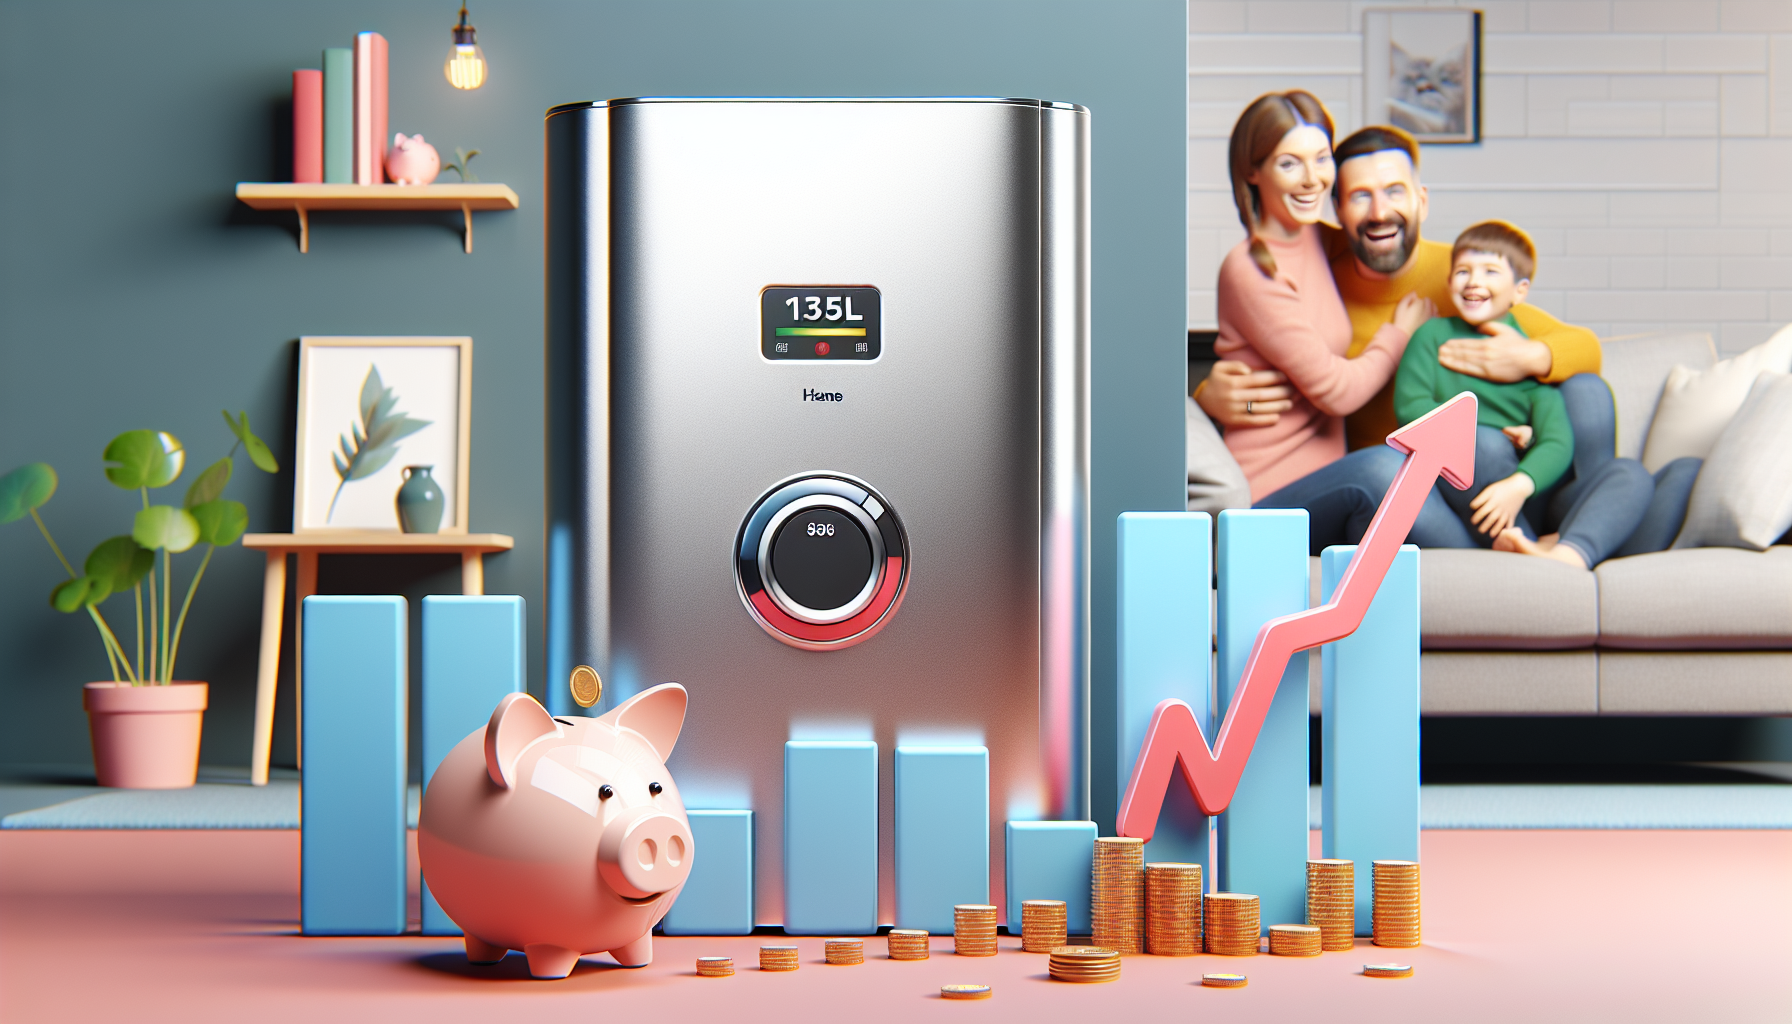 Cost savings with Rheem 135L 4 Star gas hot water system